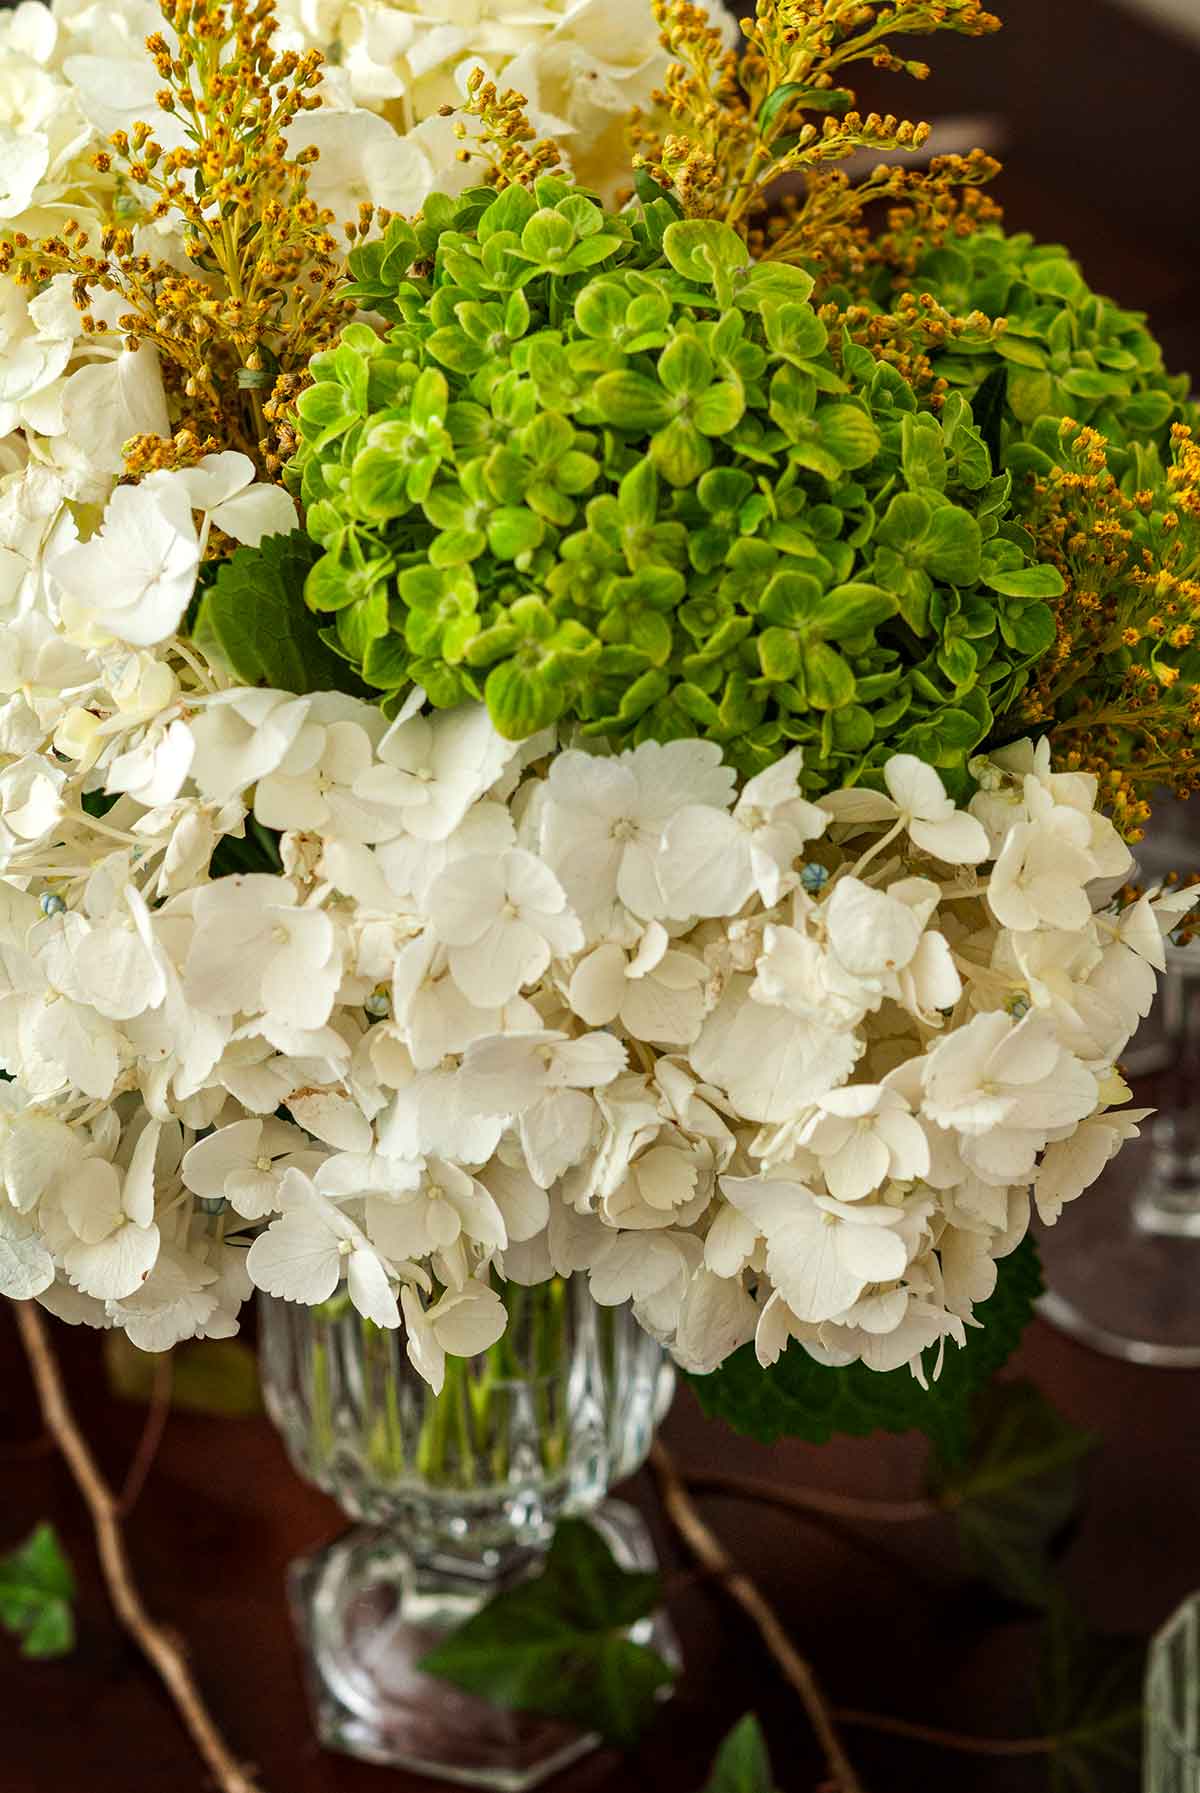 A bouquet of different color hydrangeas and goldenrod.